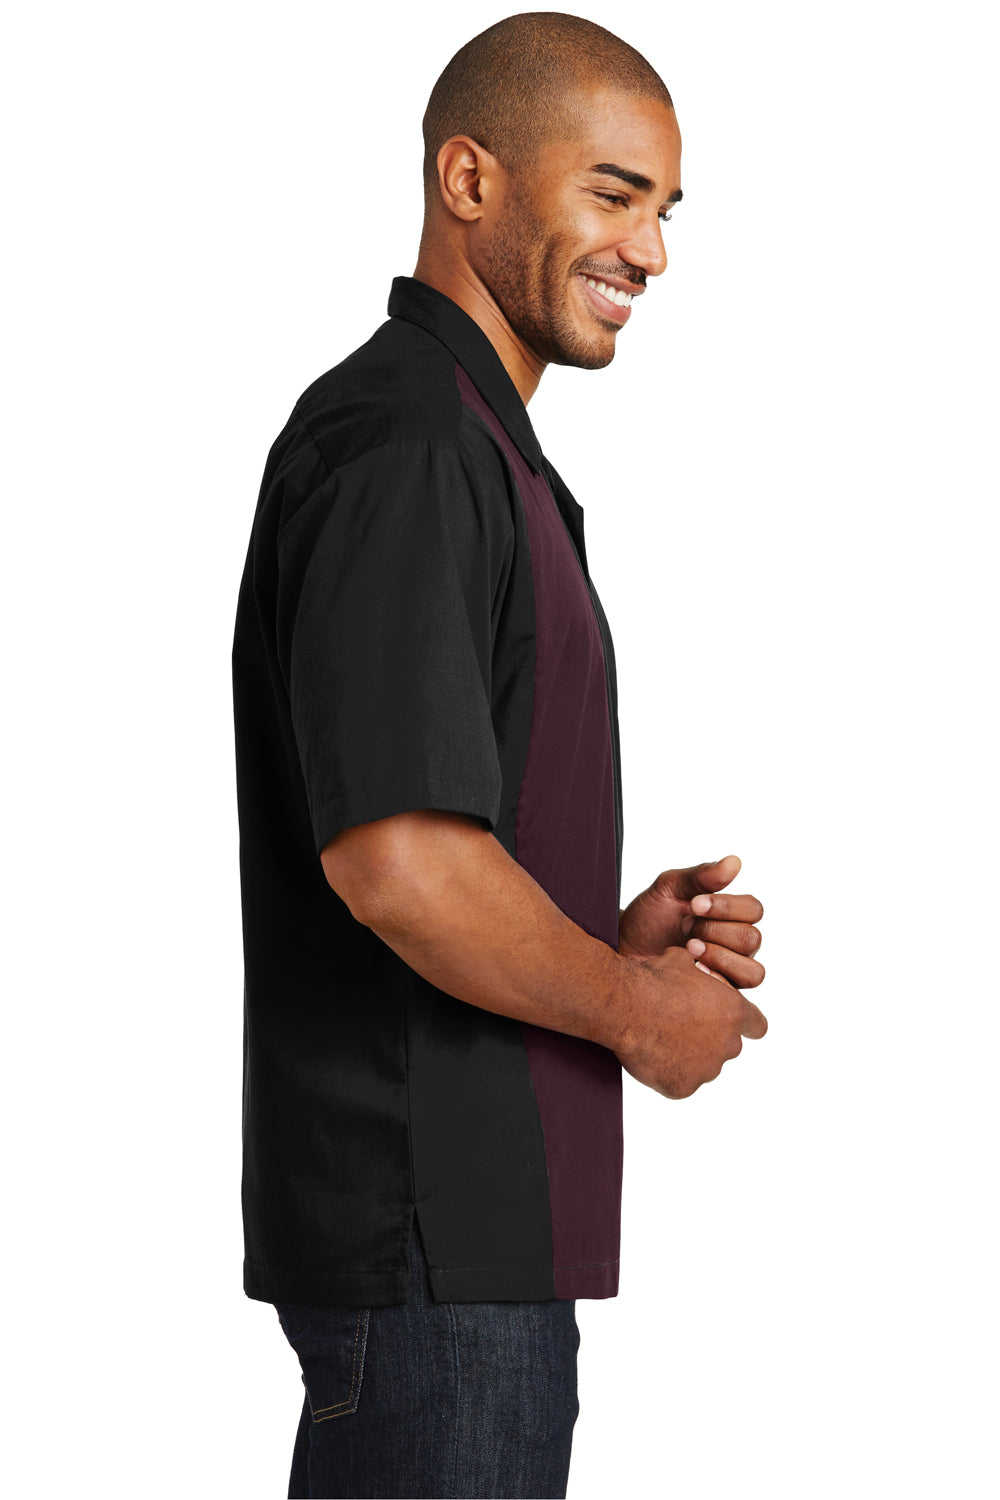 Port Authority S300 Mens Retro Easy Care Wrinkle Resistant Short Sleeve Button Down Camp Shirt Black/Burgundy Side